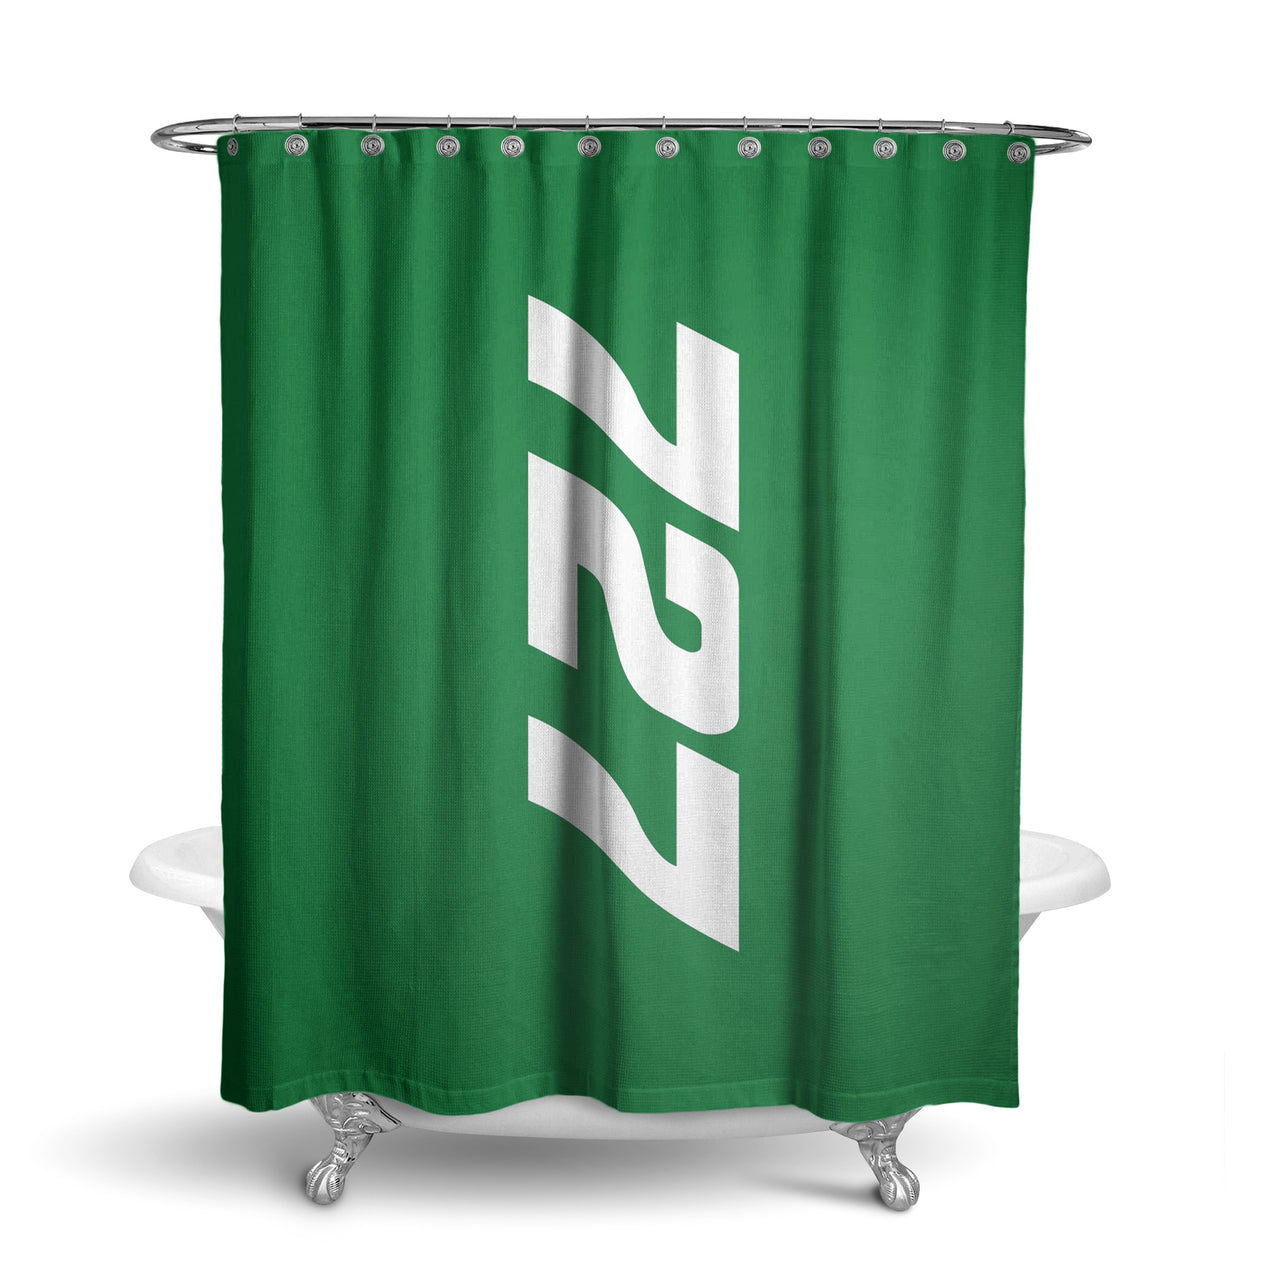 Boeing 727 Text Designed Shower Curtains